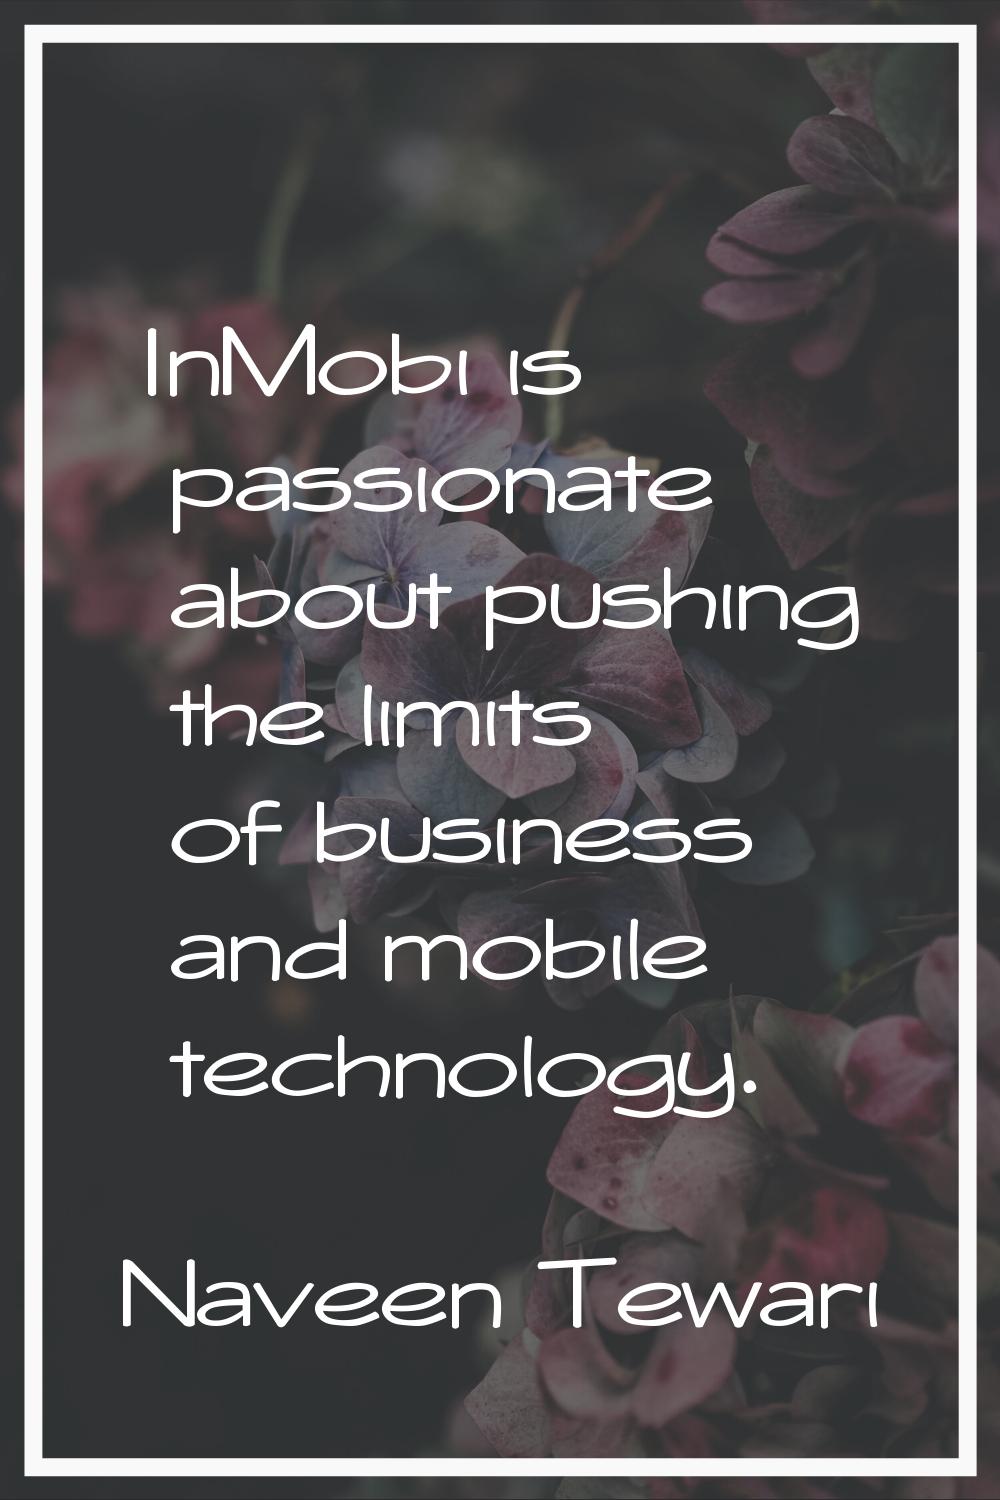 InMobi is passionate about pushing the limits of business and mobile technology.